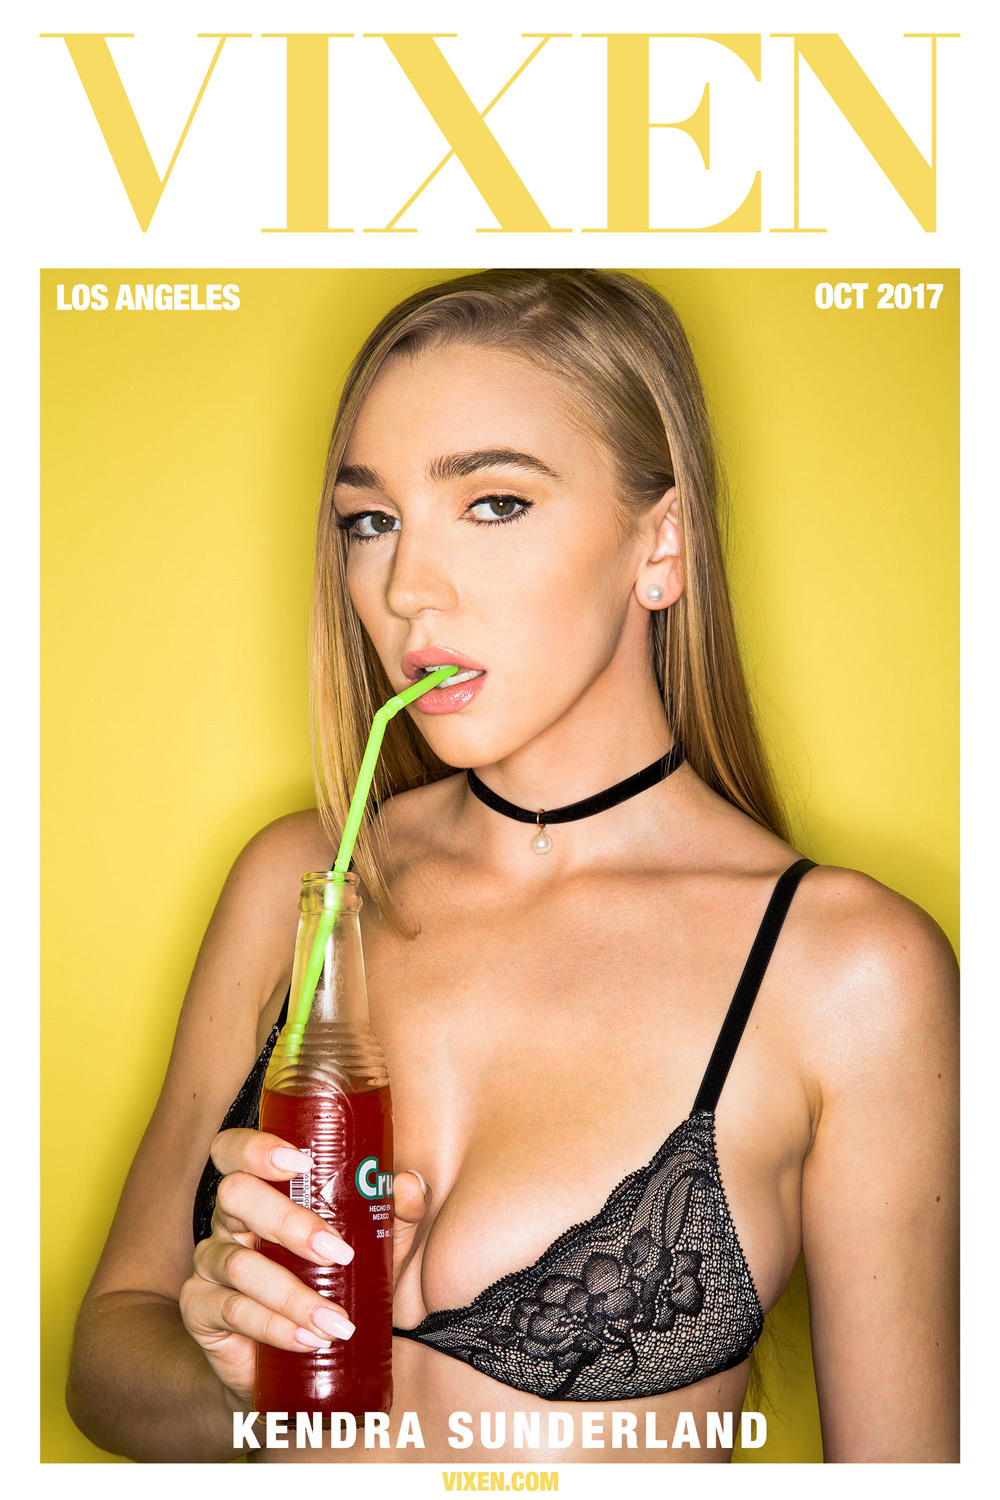 Kendra Sunderland has wild sex with her mom's handsome toy boy